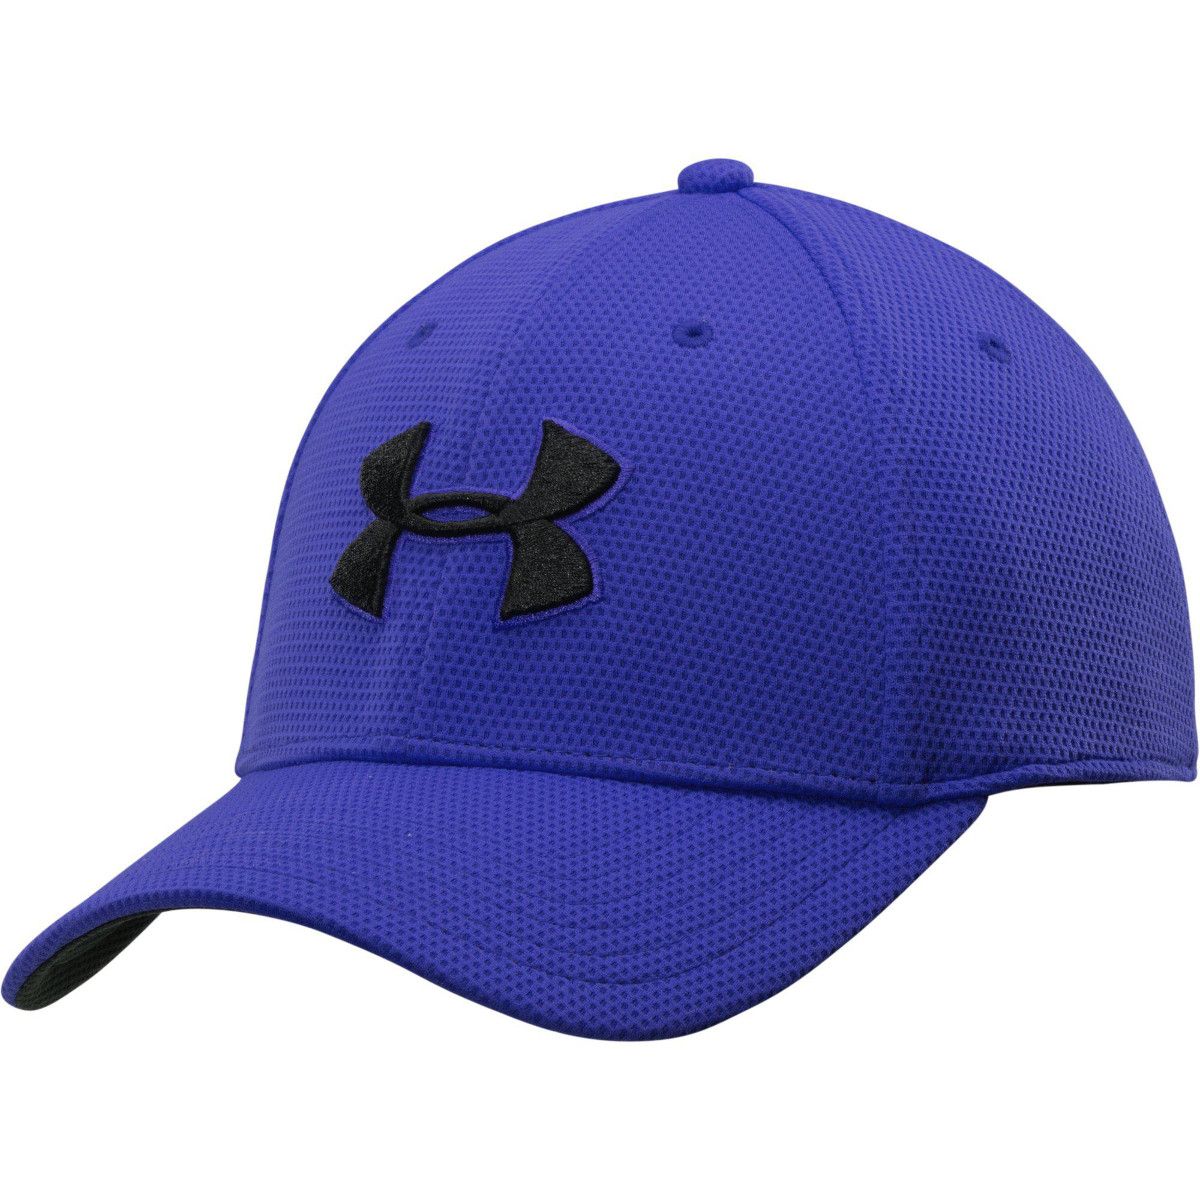 Under Armour Blitzing II Stretch Fit Cap 1254123-400